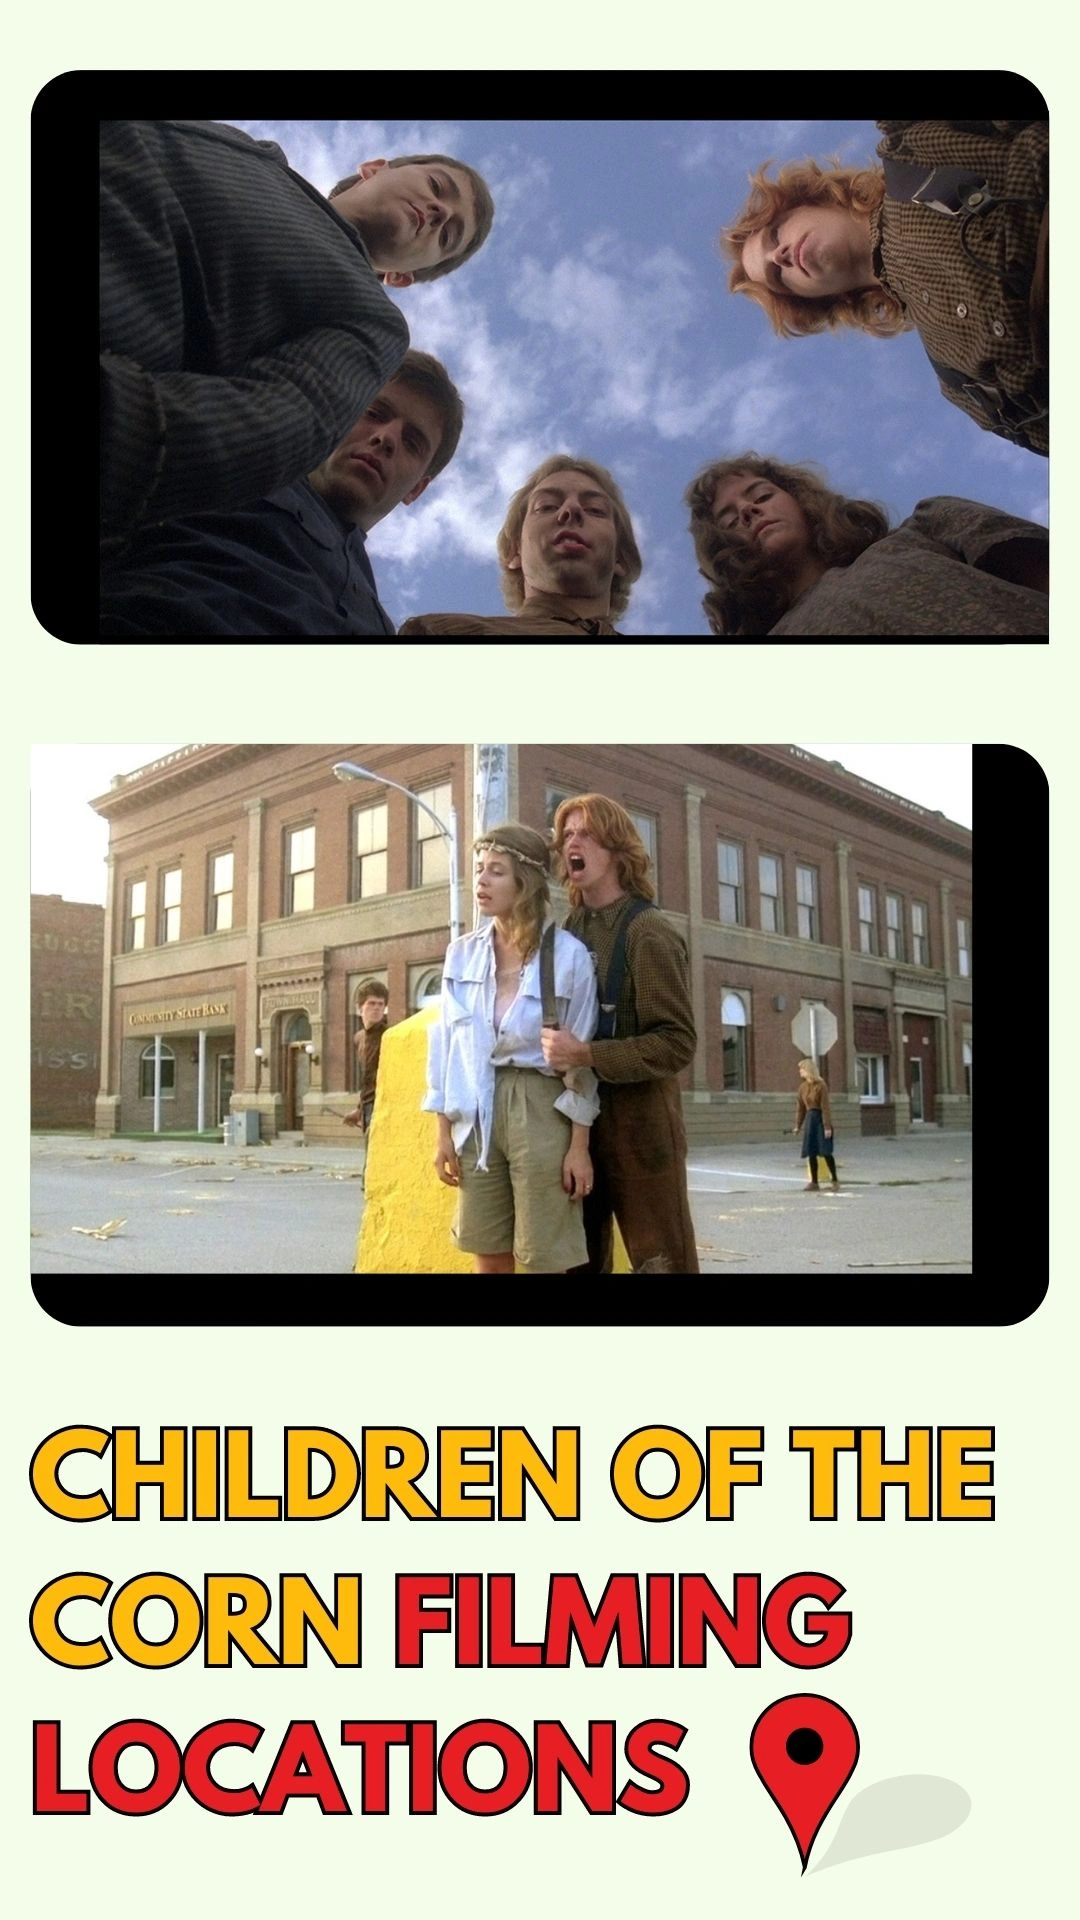 Children of the Corn Filming Locations